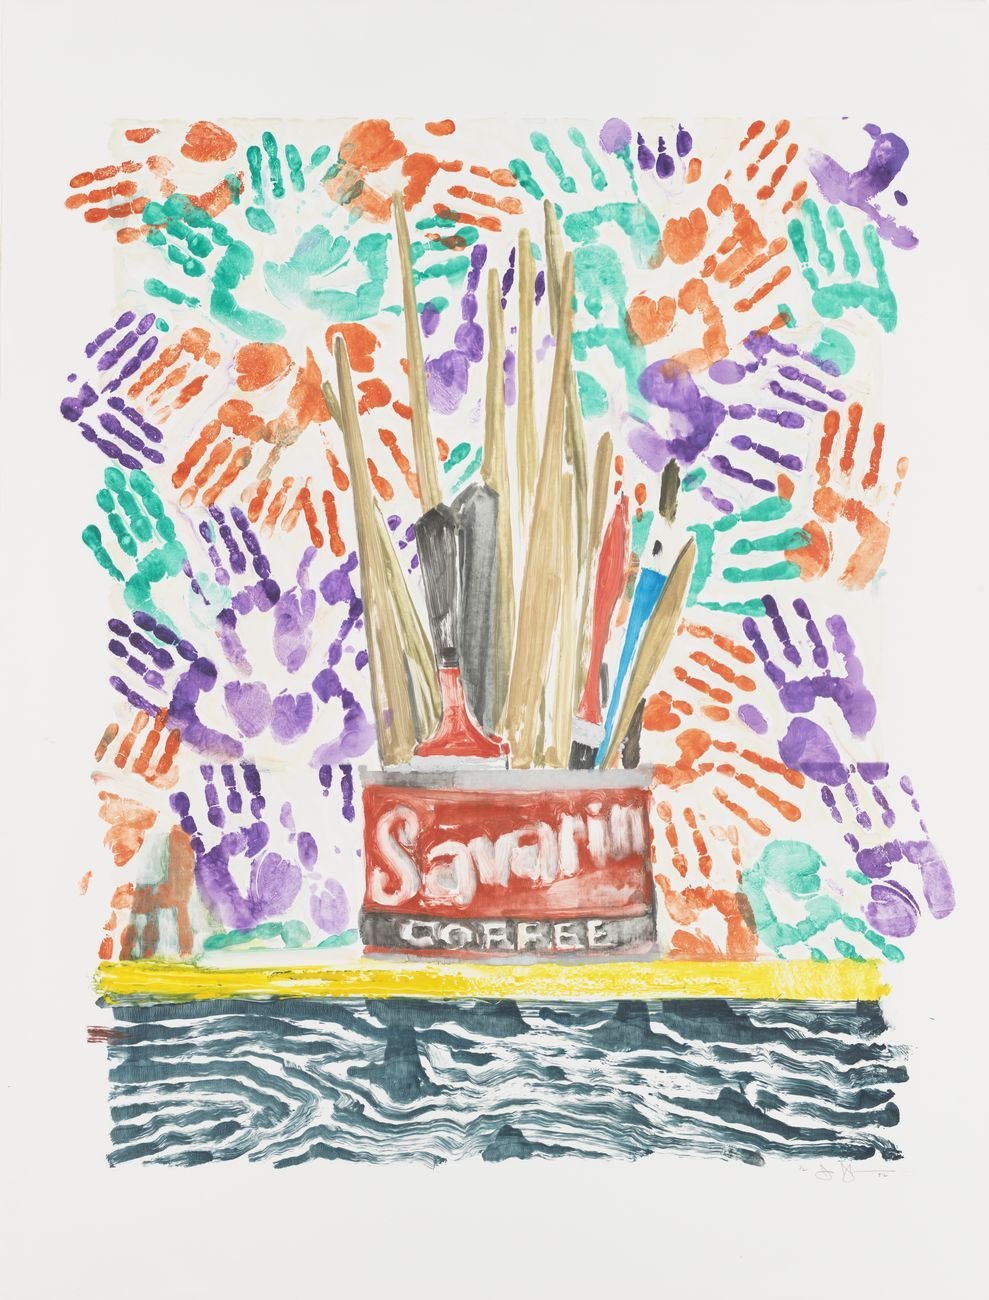 Jasper Johns, Savarin, 1982. Monotype, 50 × 38 in. (127 × 96.5 cm). Bill Goldston, James V. Smith, Thomas Cox/ULAE. Whitney Museum of American Art, New York; gift of the American Contemporary Art Foundation, Inc., Leonard A. Lauder, President, 2002.228. Prints published by ULAE © 2021 Jasper Johns and ULAE/VAGA at Artists Rights Society (ARS), New York